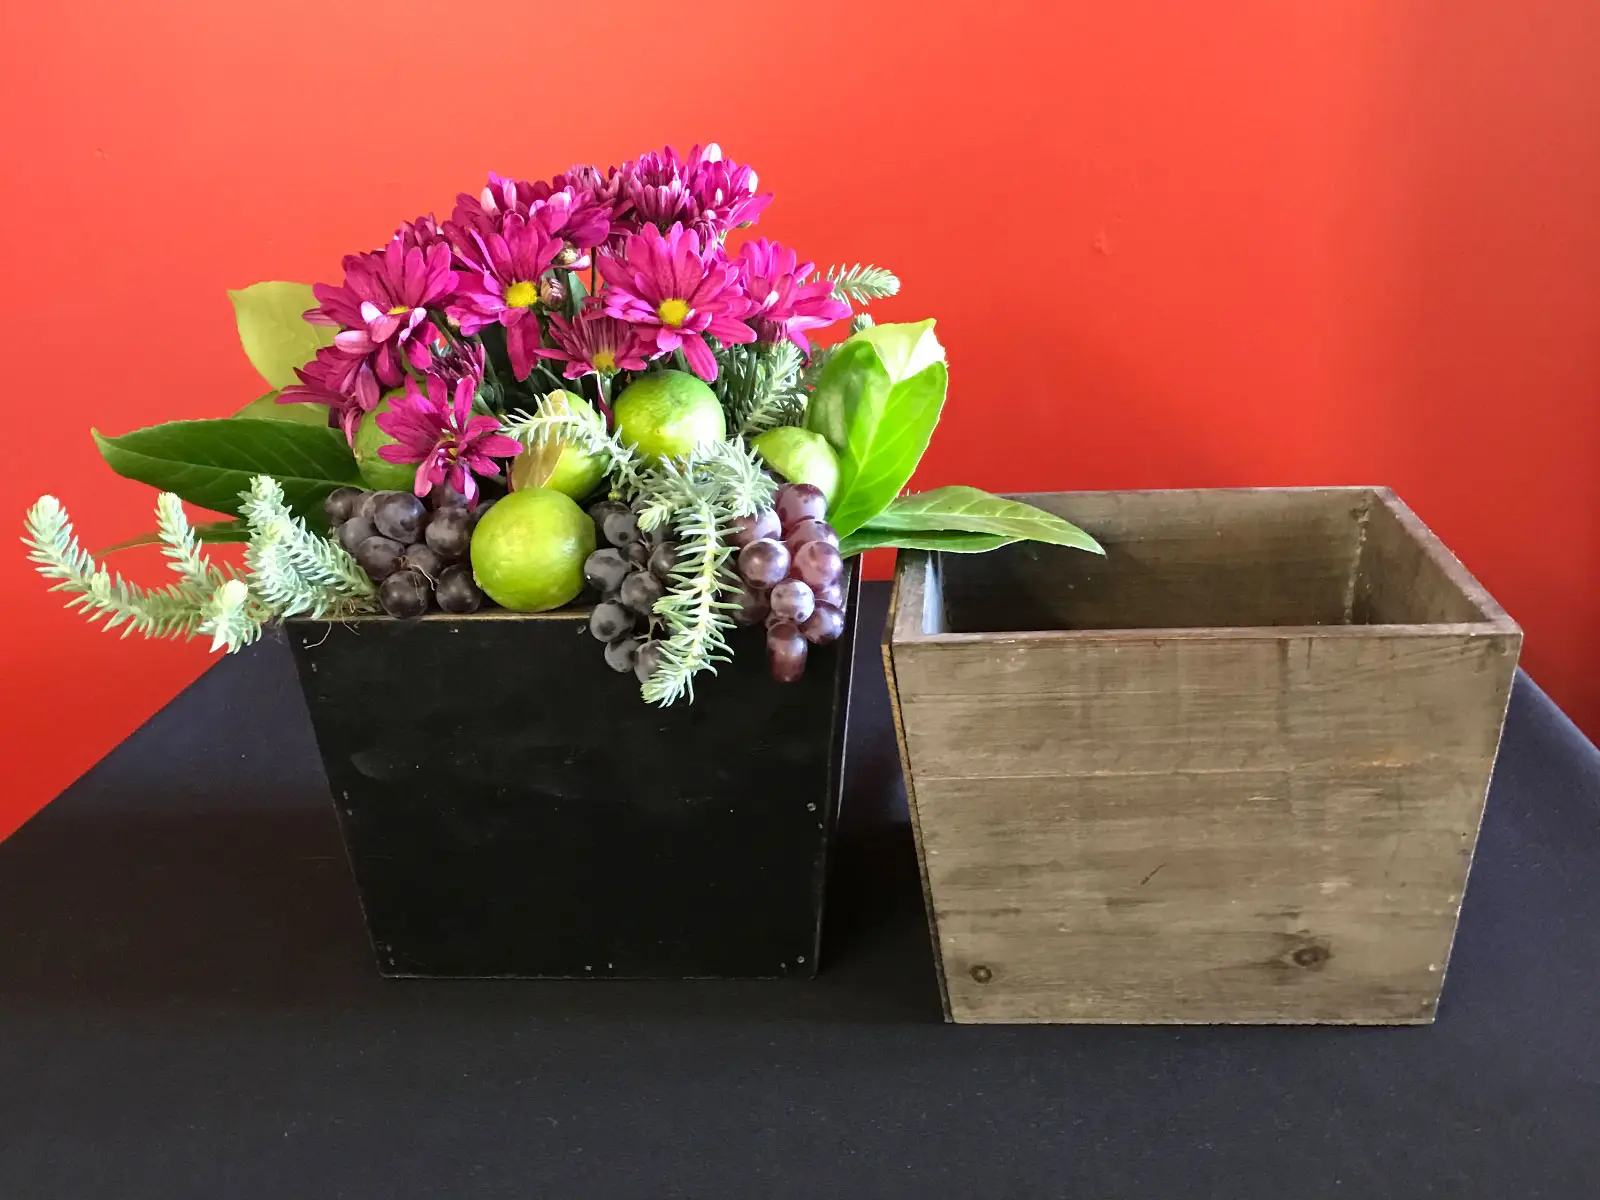 Purple flowers with green leaves, limes and grapes set in a grey box